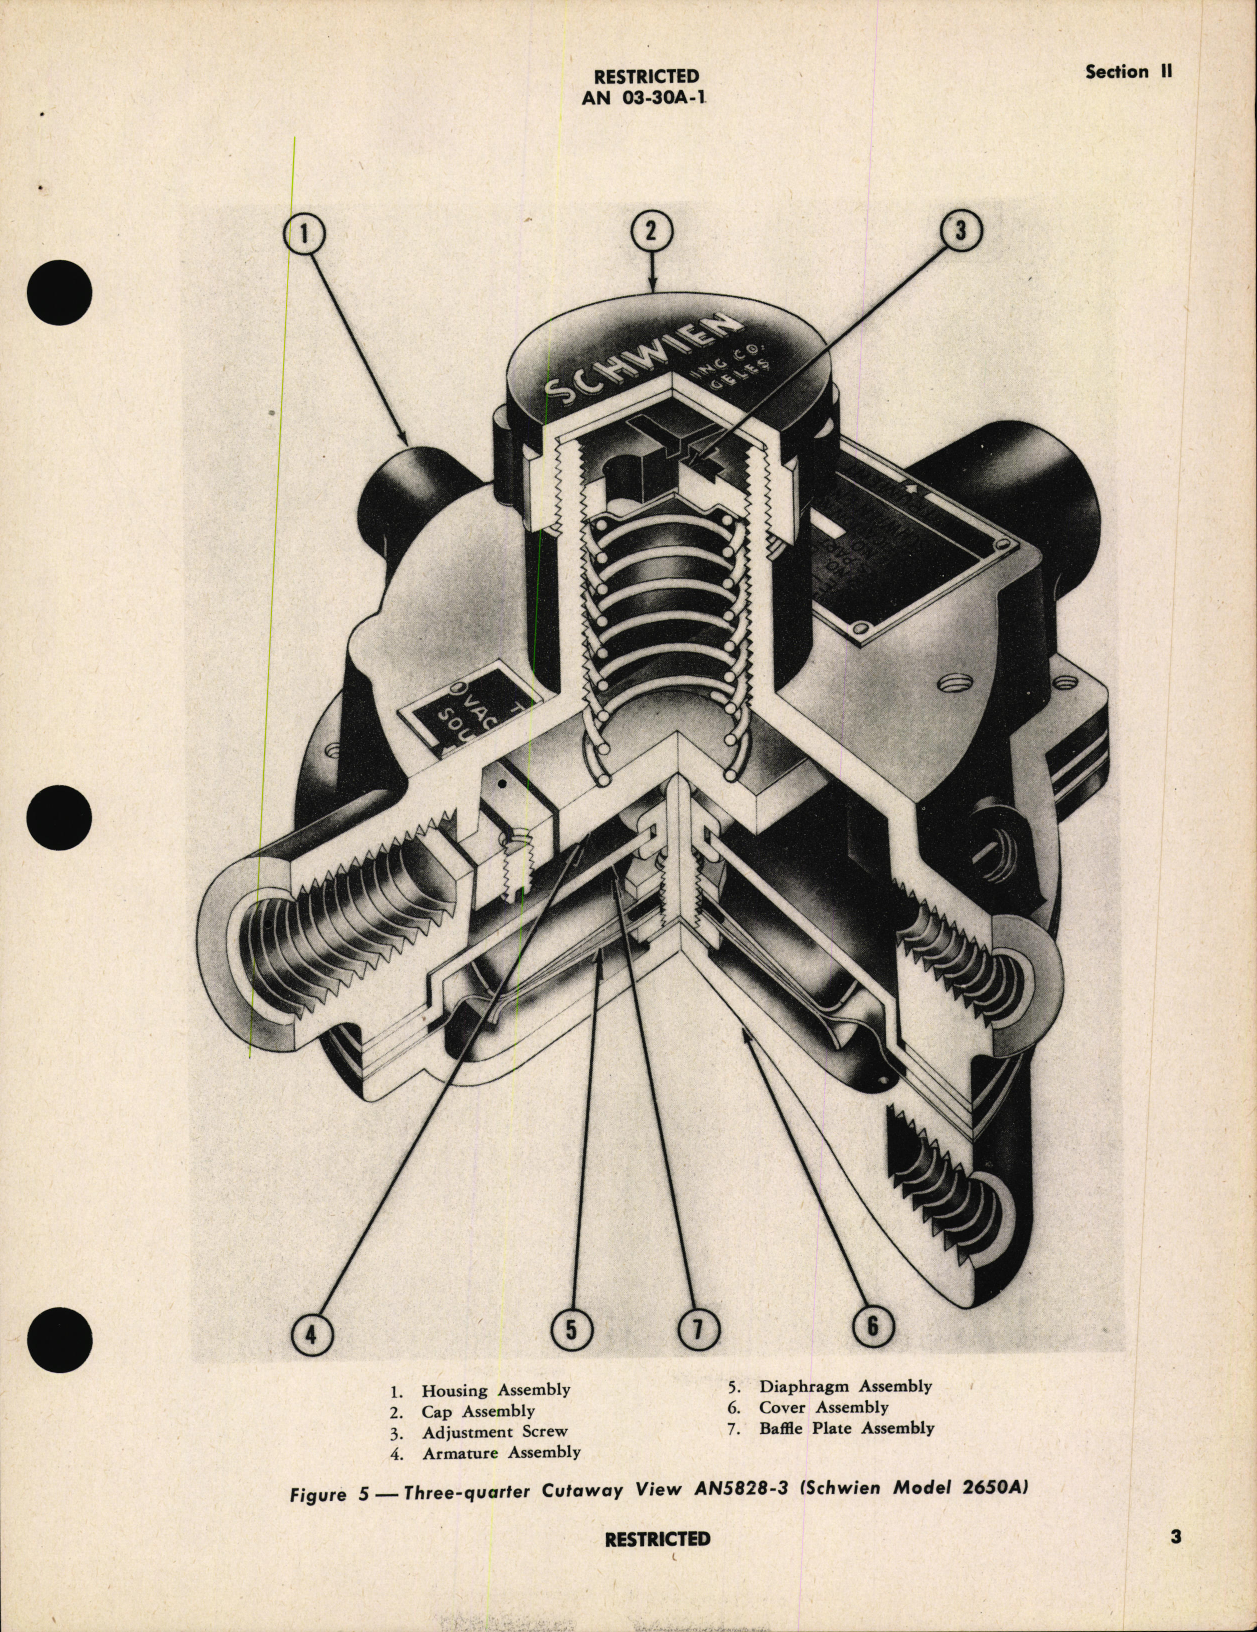 Sample page 7 from AirCorps Library document: Handbook of Instructions with Parts Catalog for Vacuum Regulating Valves